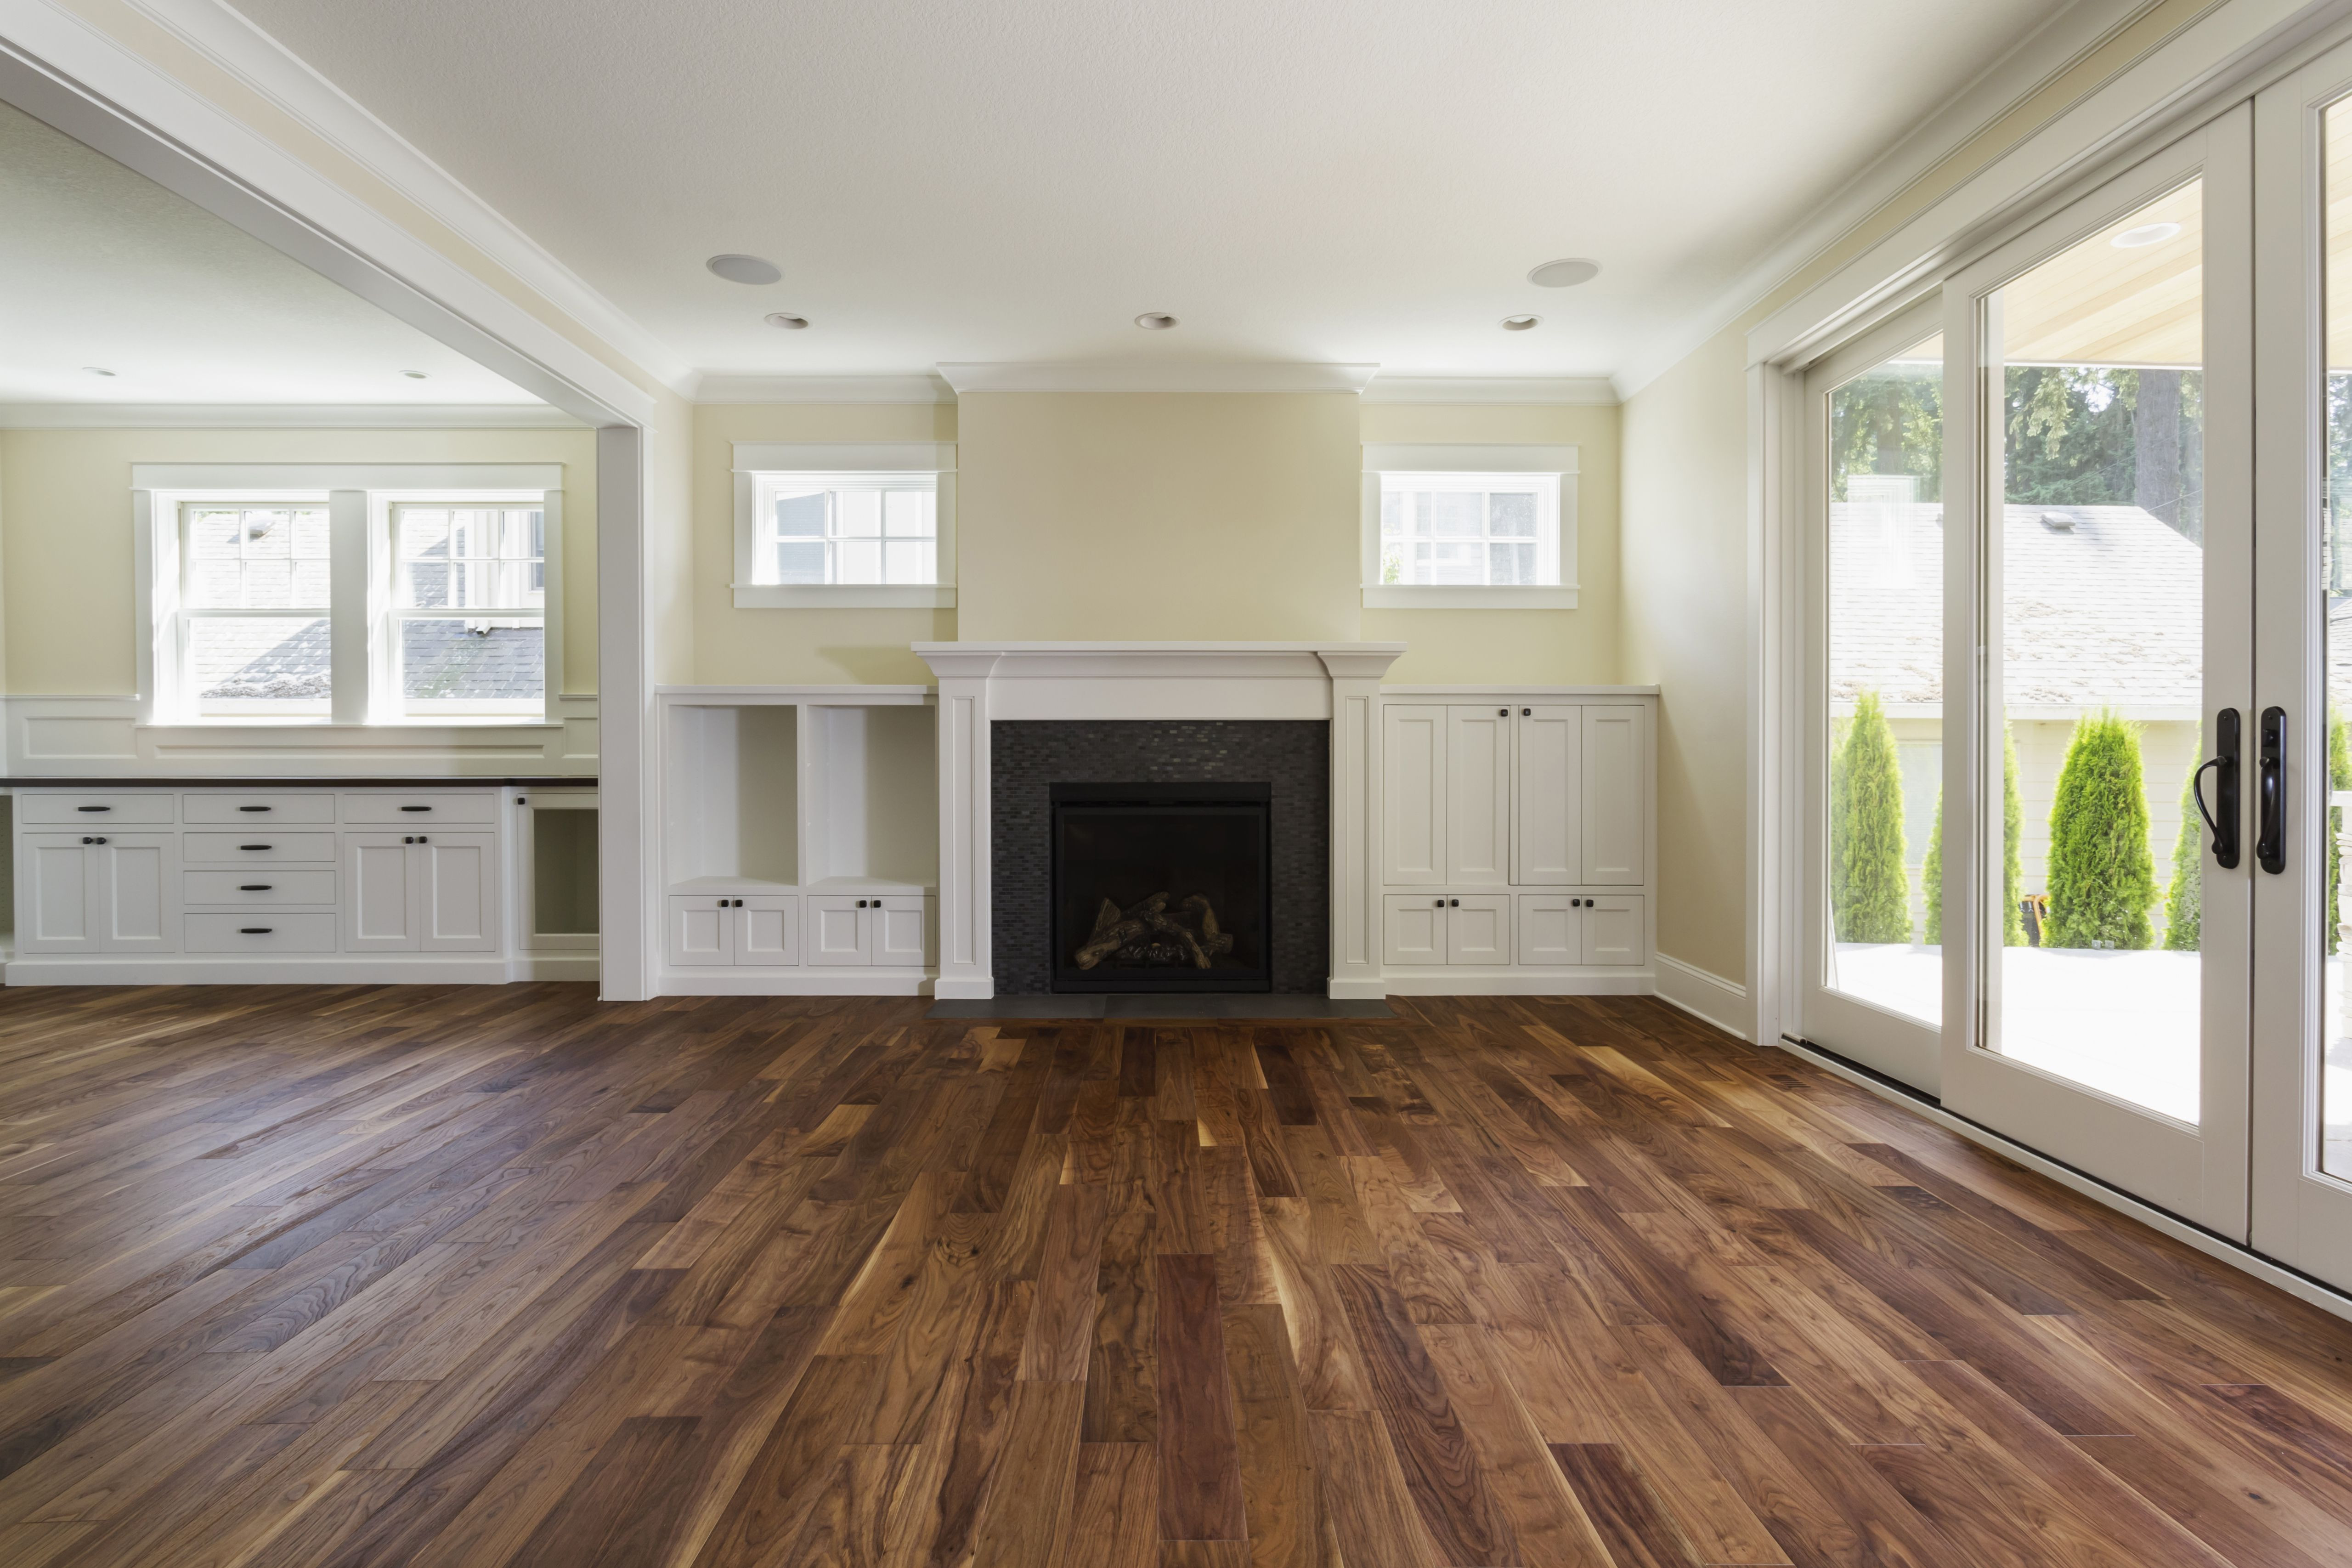 25 Fashionable High End Laminate Flooring Vs Hardwood 2024 free download high end laminate flooring vs hardwood of the pros and cons of prefinished hardwood flooring within fireplace and built in shelves in living room 482143011 57bef8e33df78cc16e035397